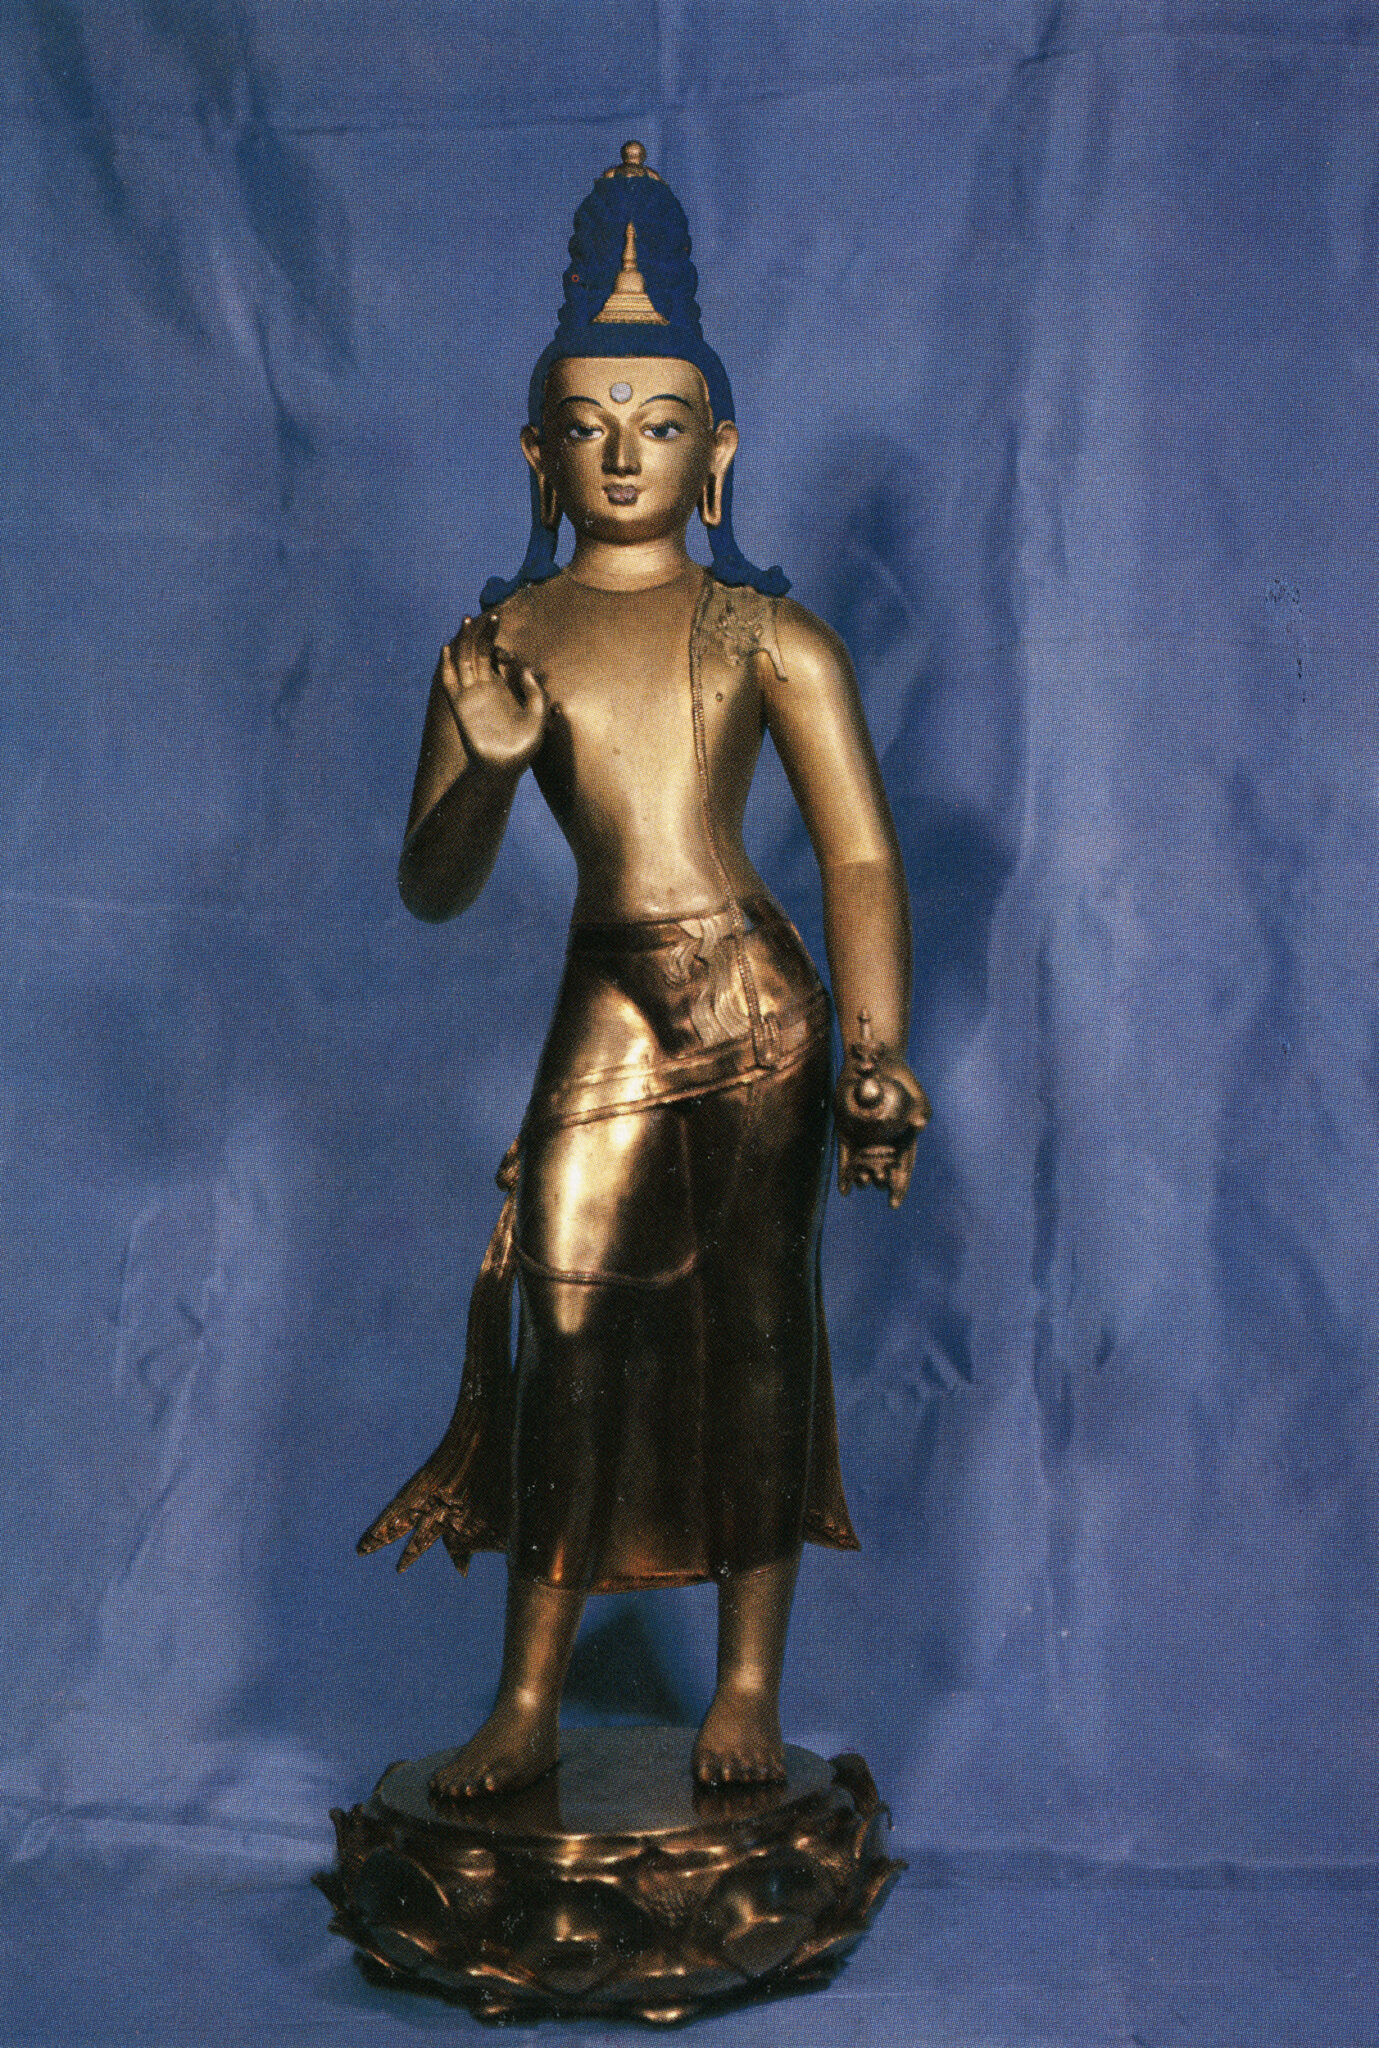 Golden Buddha with blue hair wearing diaphanous dhoti standing with left hand posed in mudra